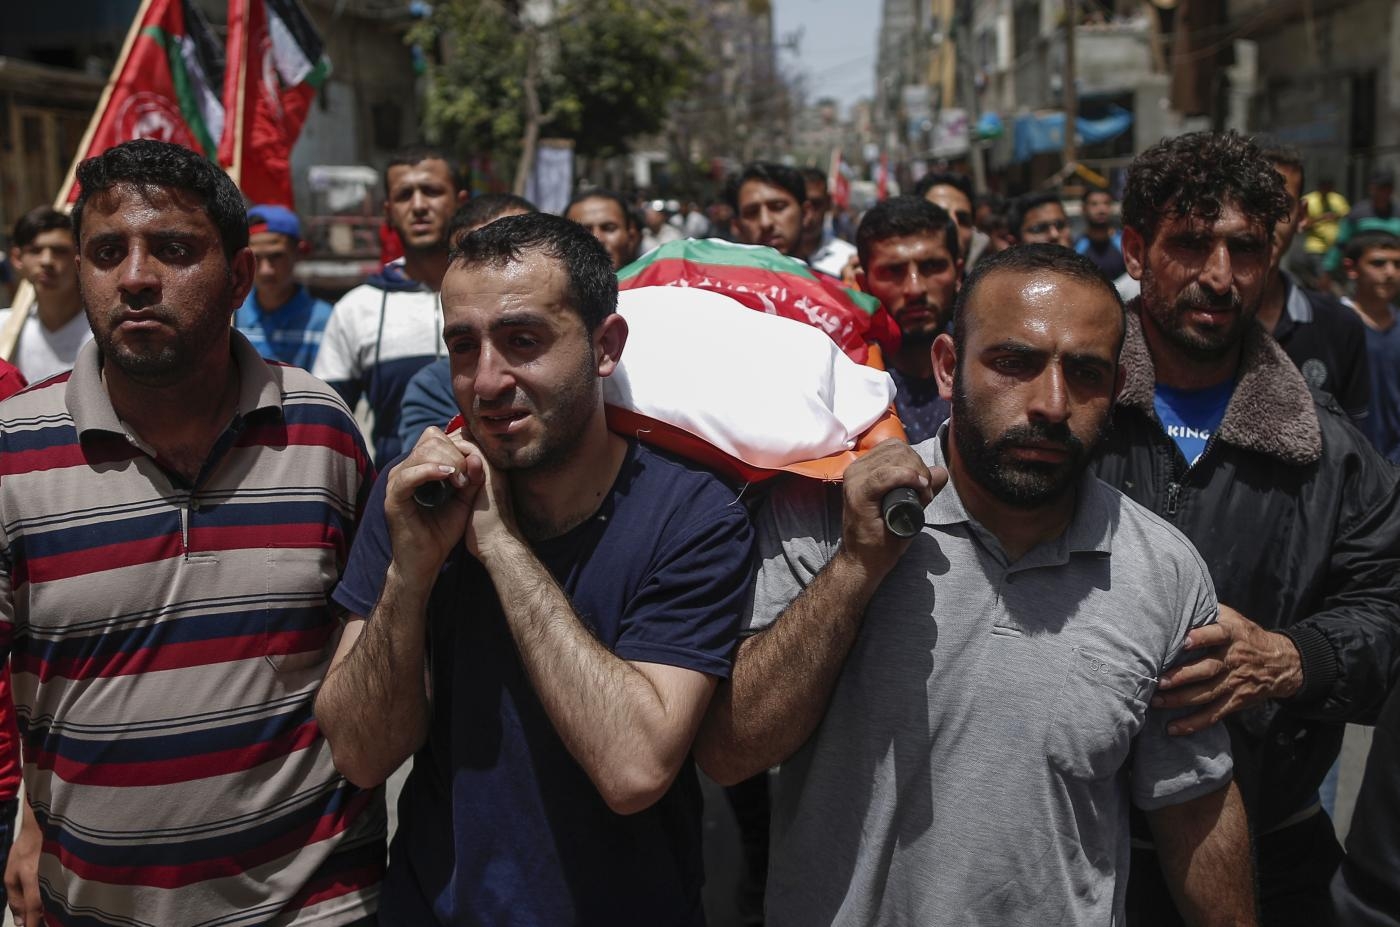 Relatives carry the body of a Palestinian, who was killed in Israeli strikes the previous day, during a funeral ceremony in Beit Lahia, in northern Gaza Strip (AFP)